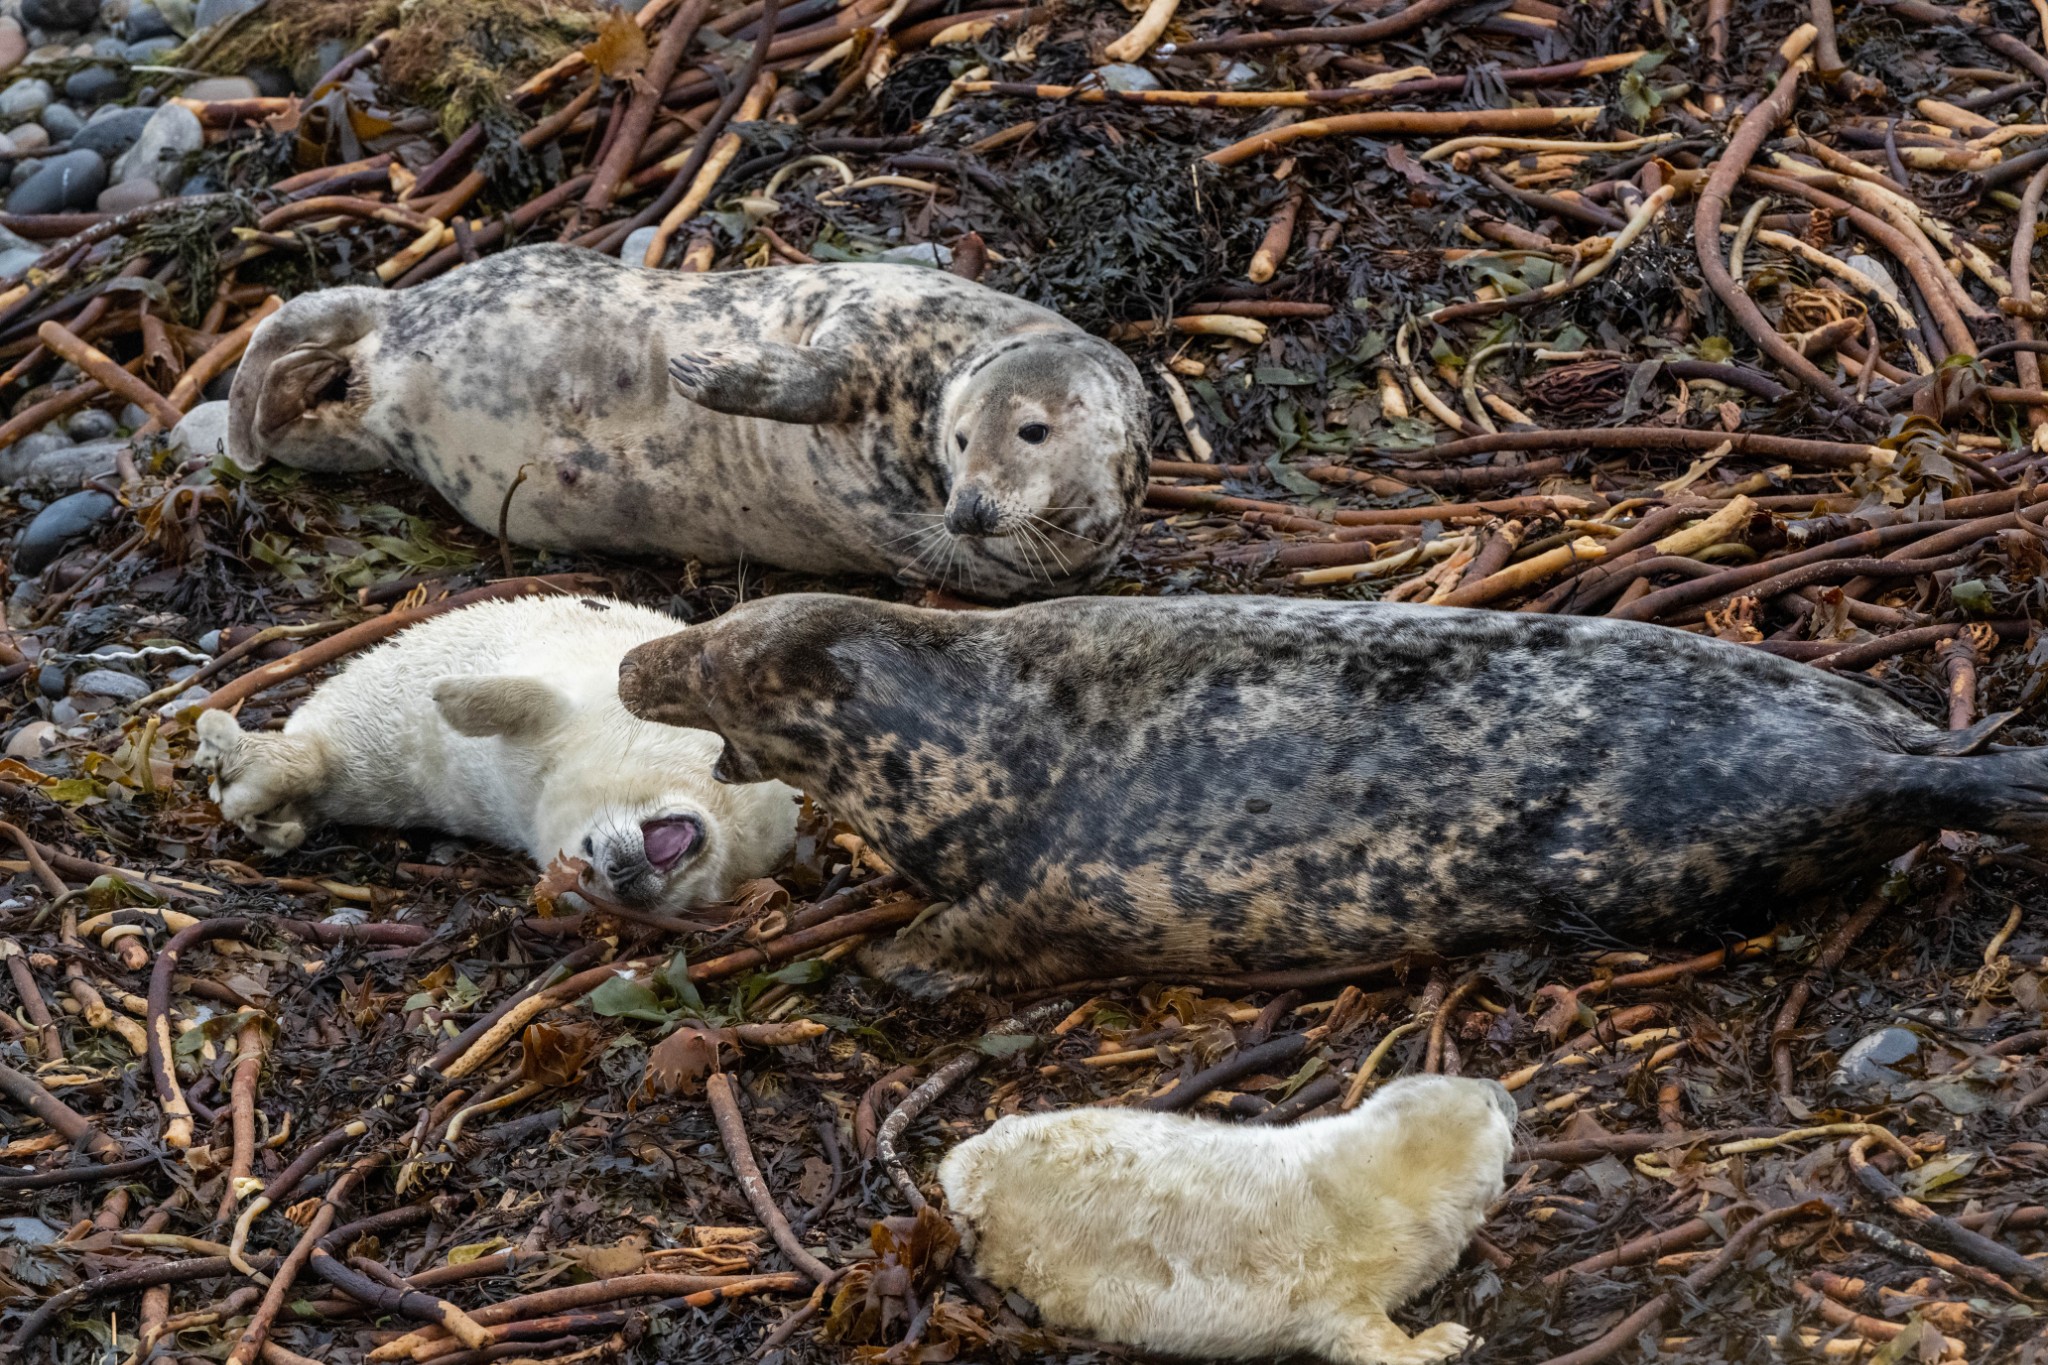 Grey seals and their pups in Orkney - image by Raymond Besant